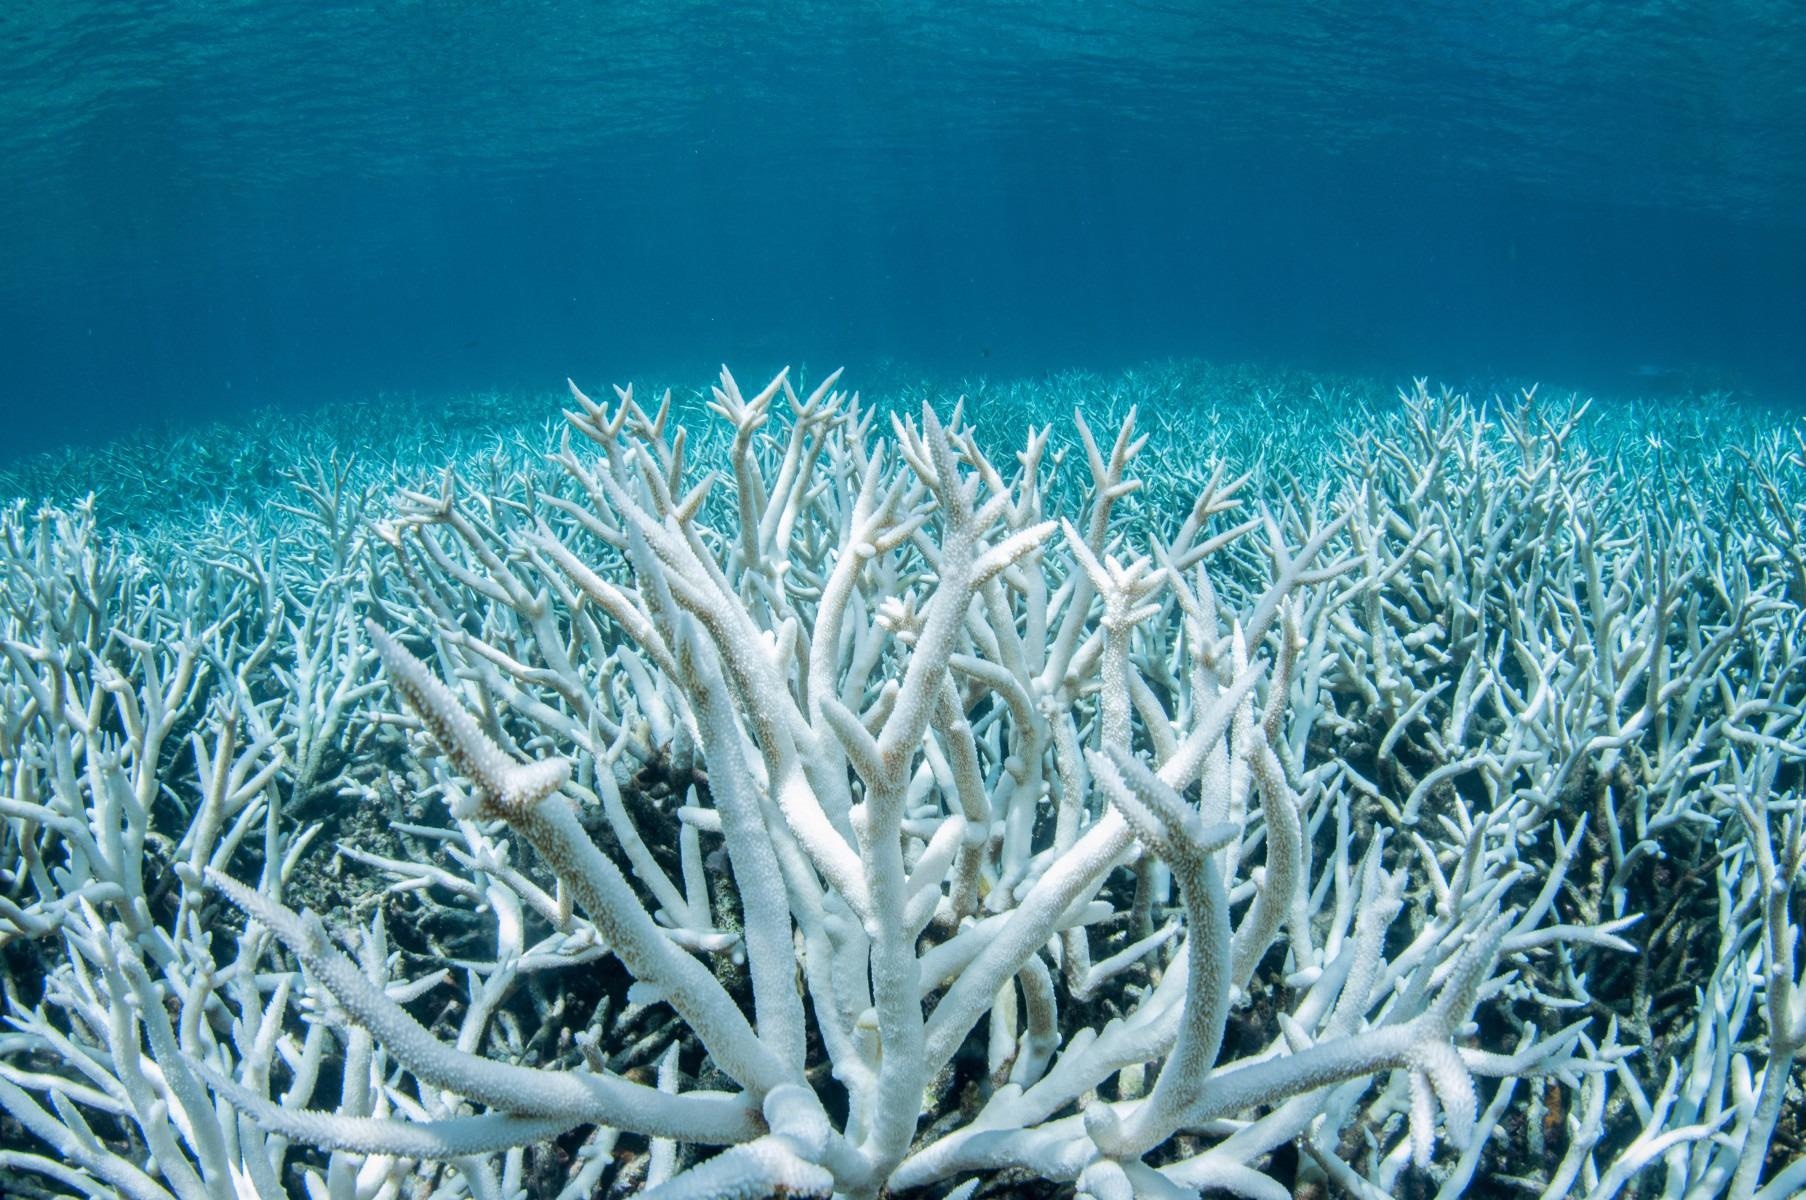 Climate-Smart Policies Need to Be Implemented to Save Coral Reefs from Extinction.